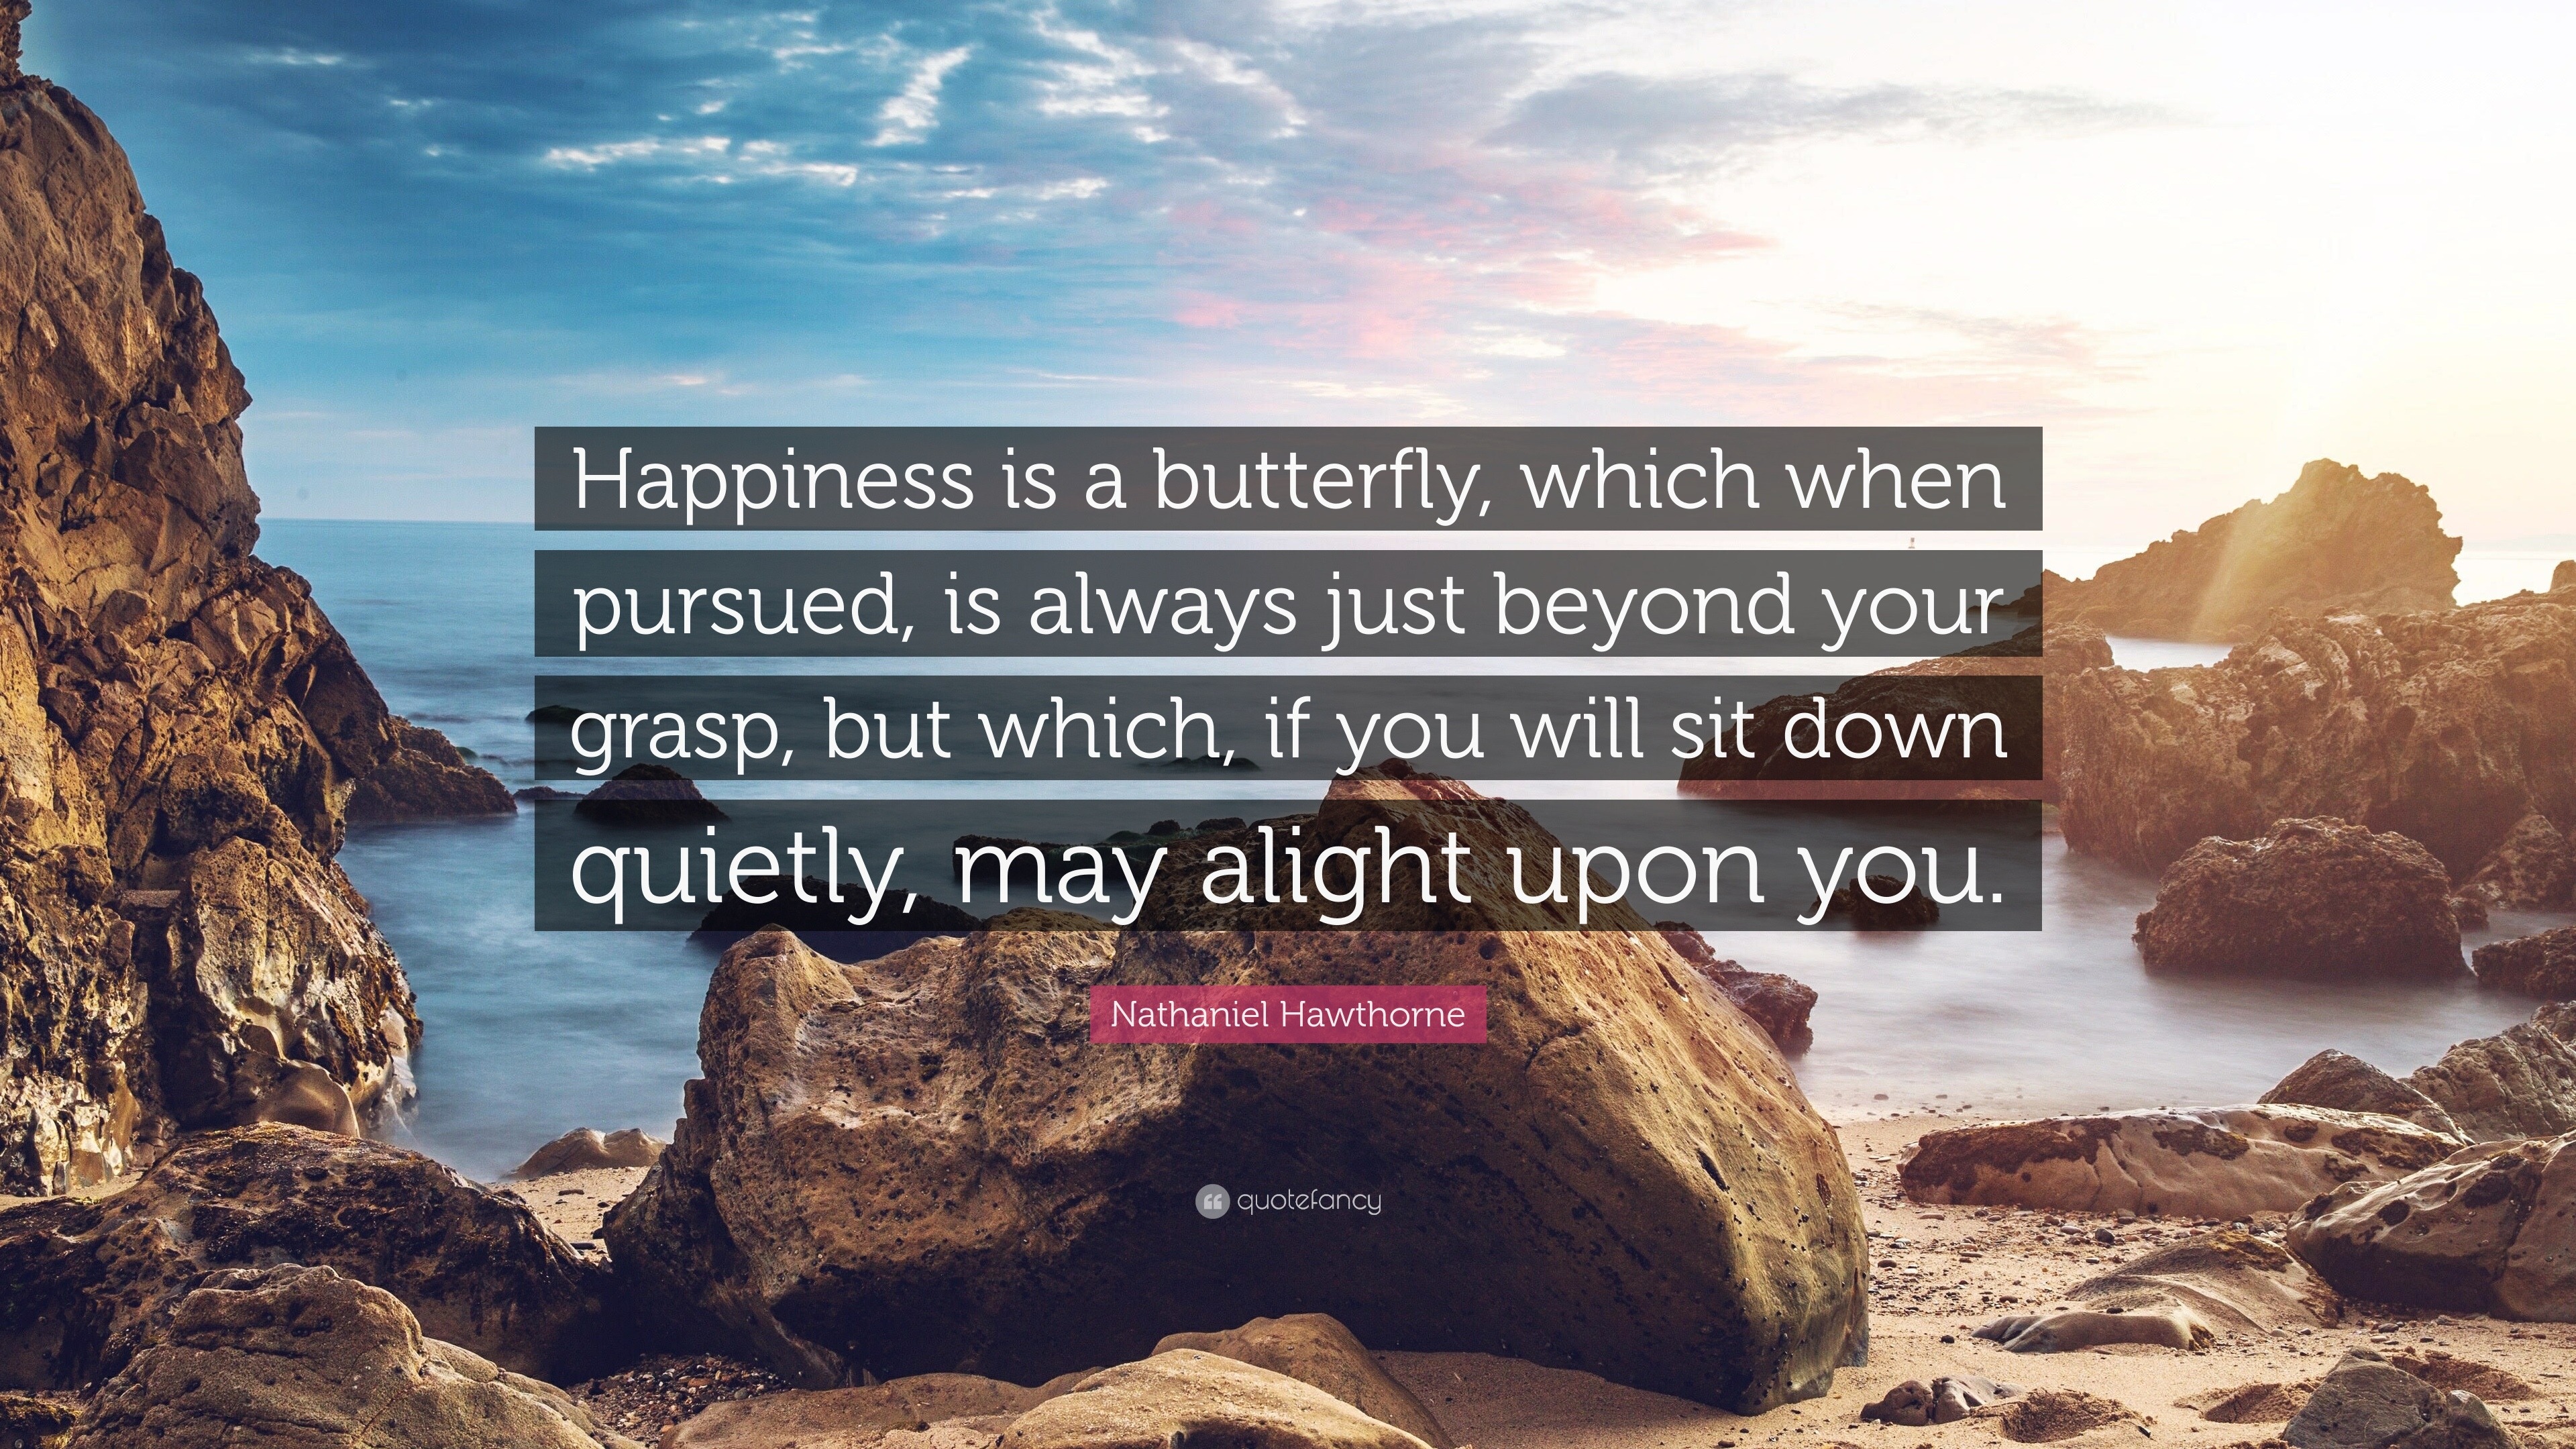 nathaniel hawthorne quotes happiness